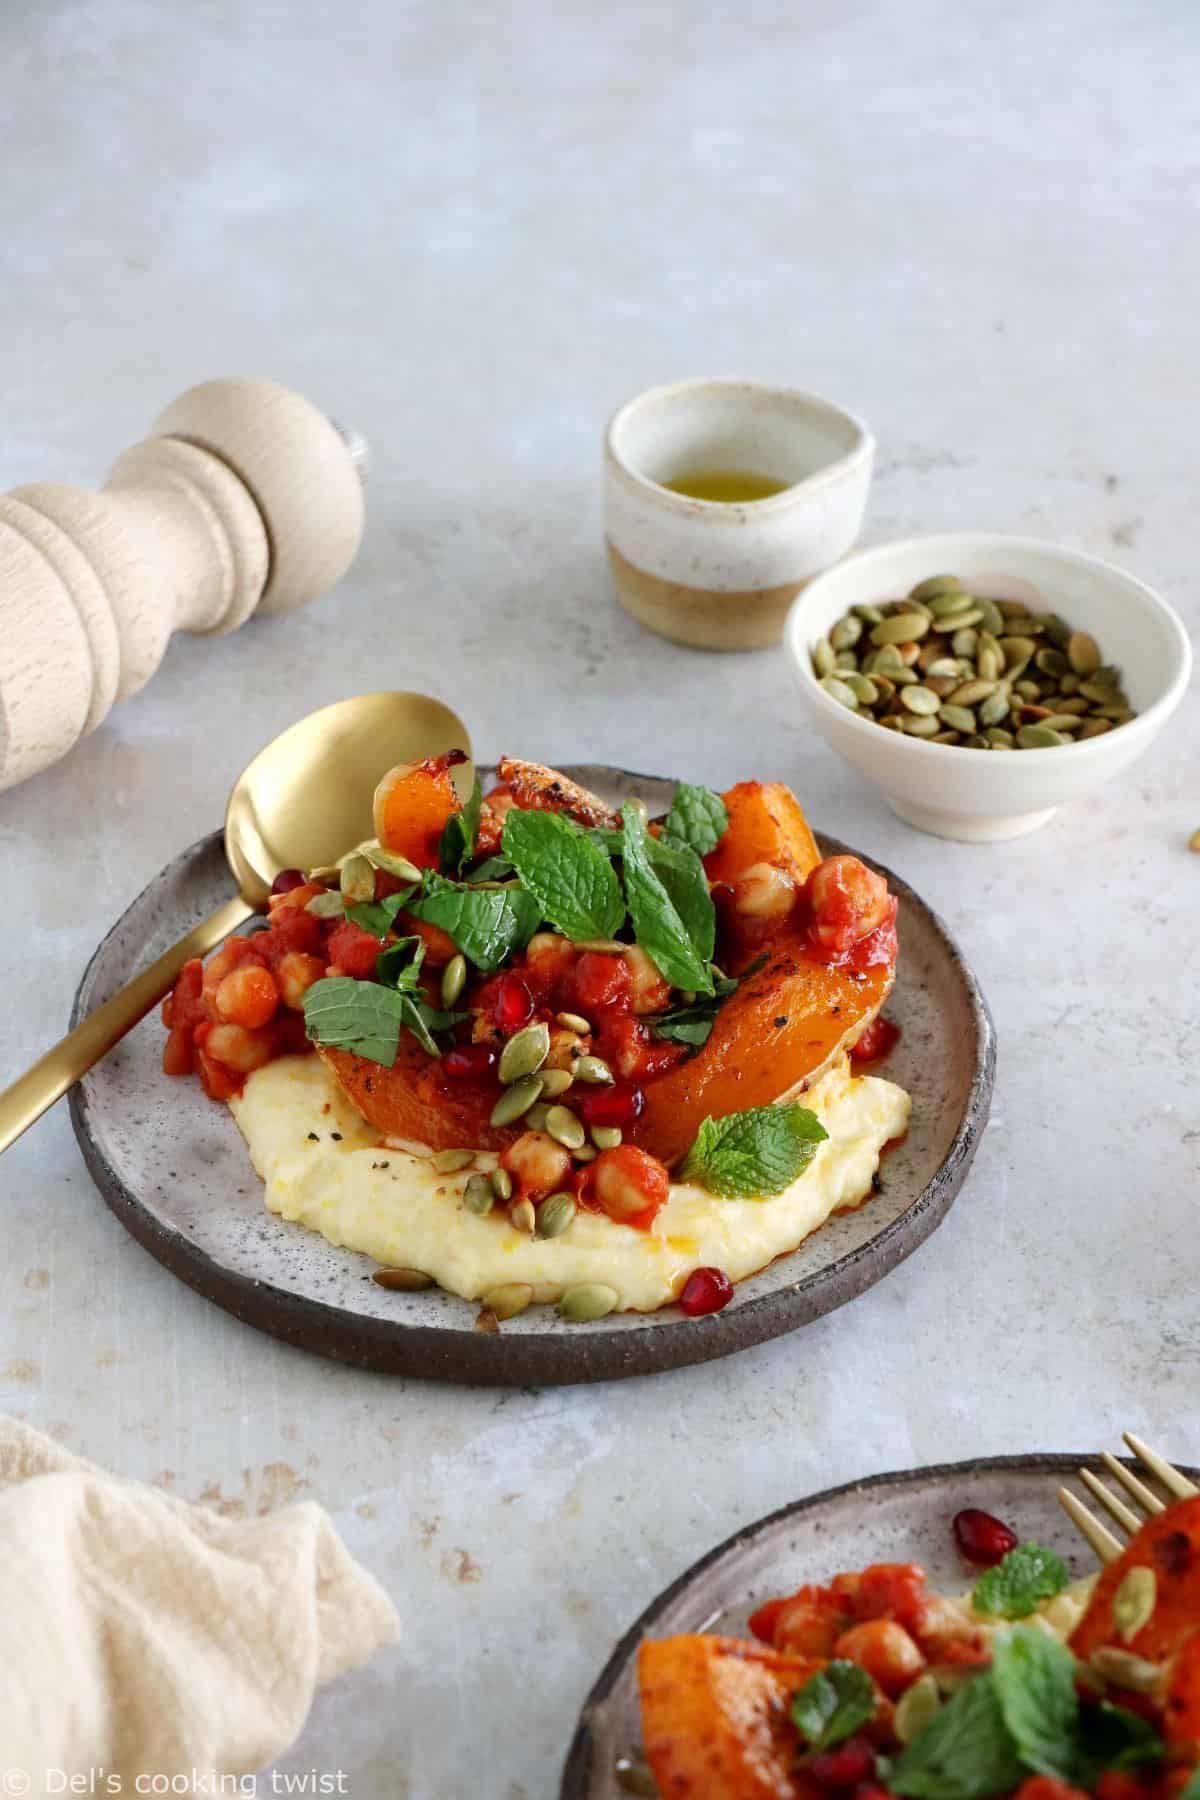 Harissa roasted butternut squash with polenta is a delicious vegetarian dish, loaded with Moroccan flavors.